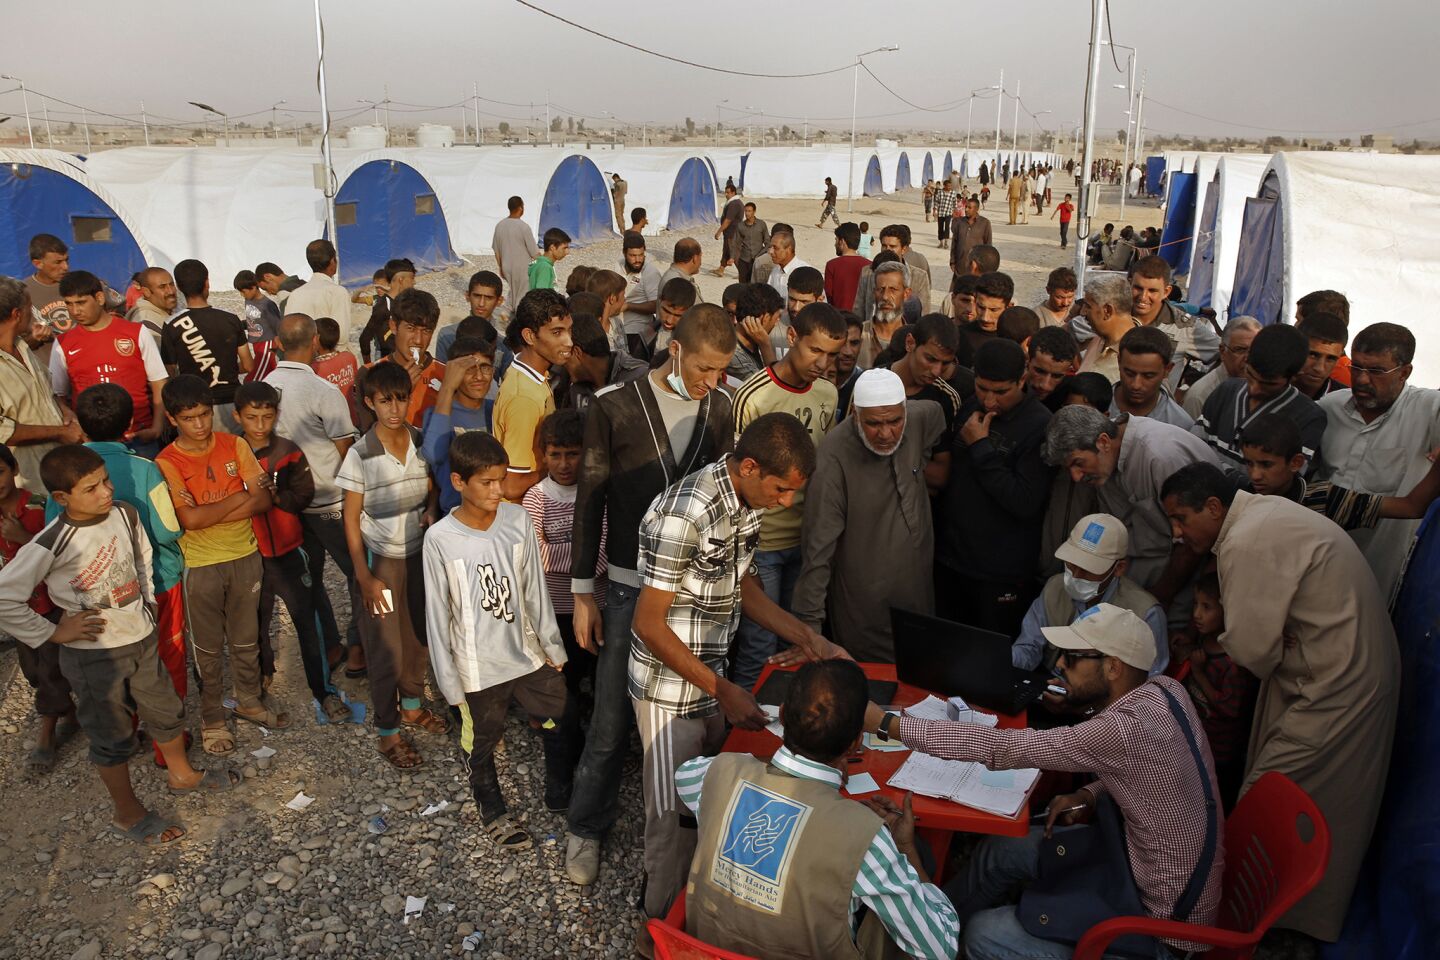 As many Iraqis are returning home, others are fleeing the fighting in villages surrounding Mosul. At Camp JJadh, 3,000 people arrived in the past week, but many more are expected as the battle for Mosul continues. New arrivals line up for food, provide by the World Food Program.